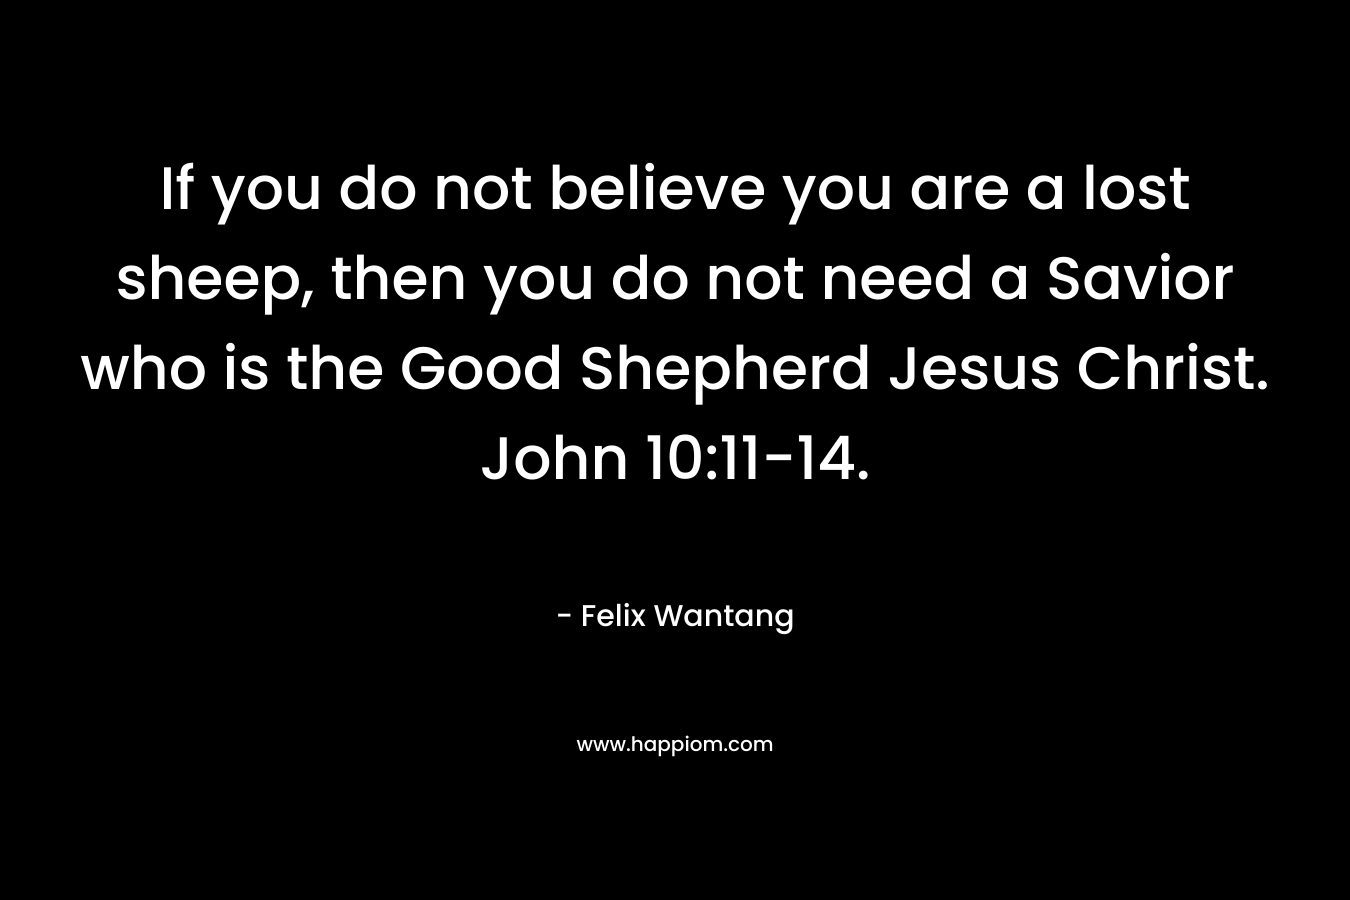 If you do not believe you are a lost sheep, then you do not need a Savior who is the Good Shepherd Jesus Christ. John 10:11-14.